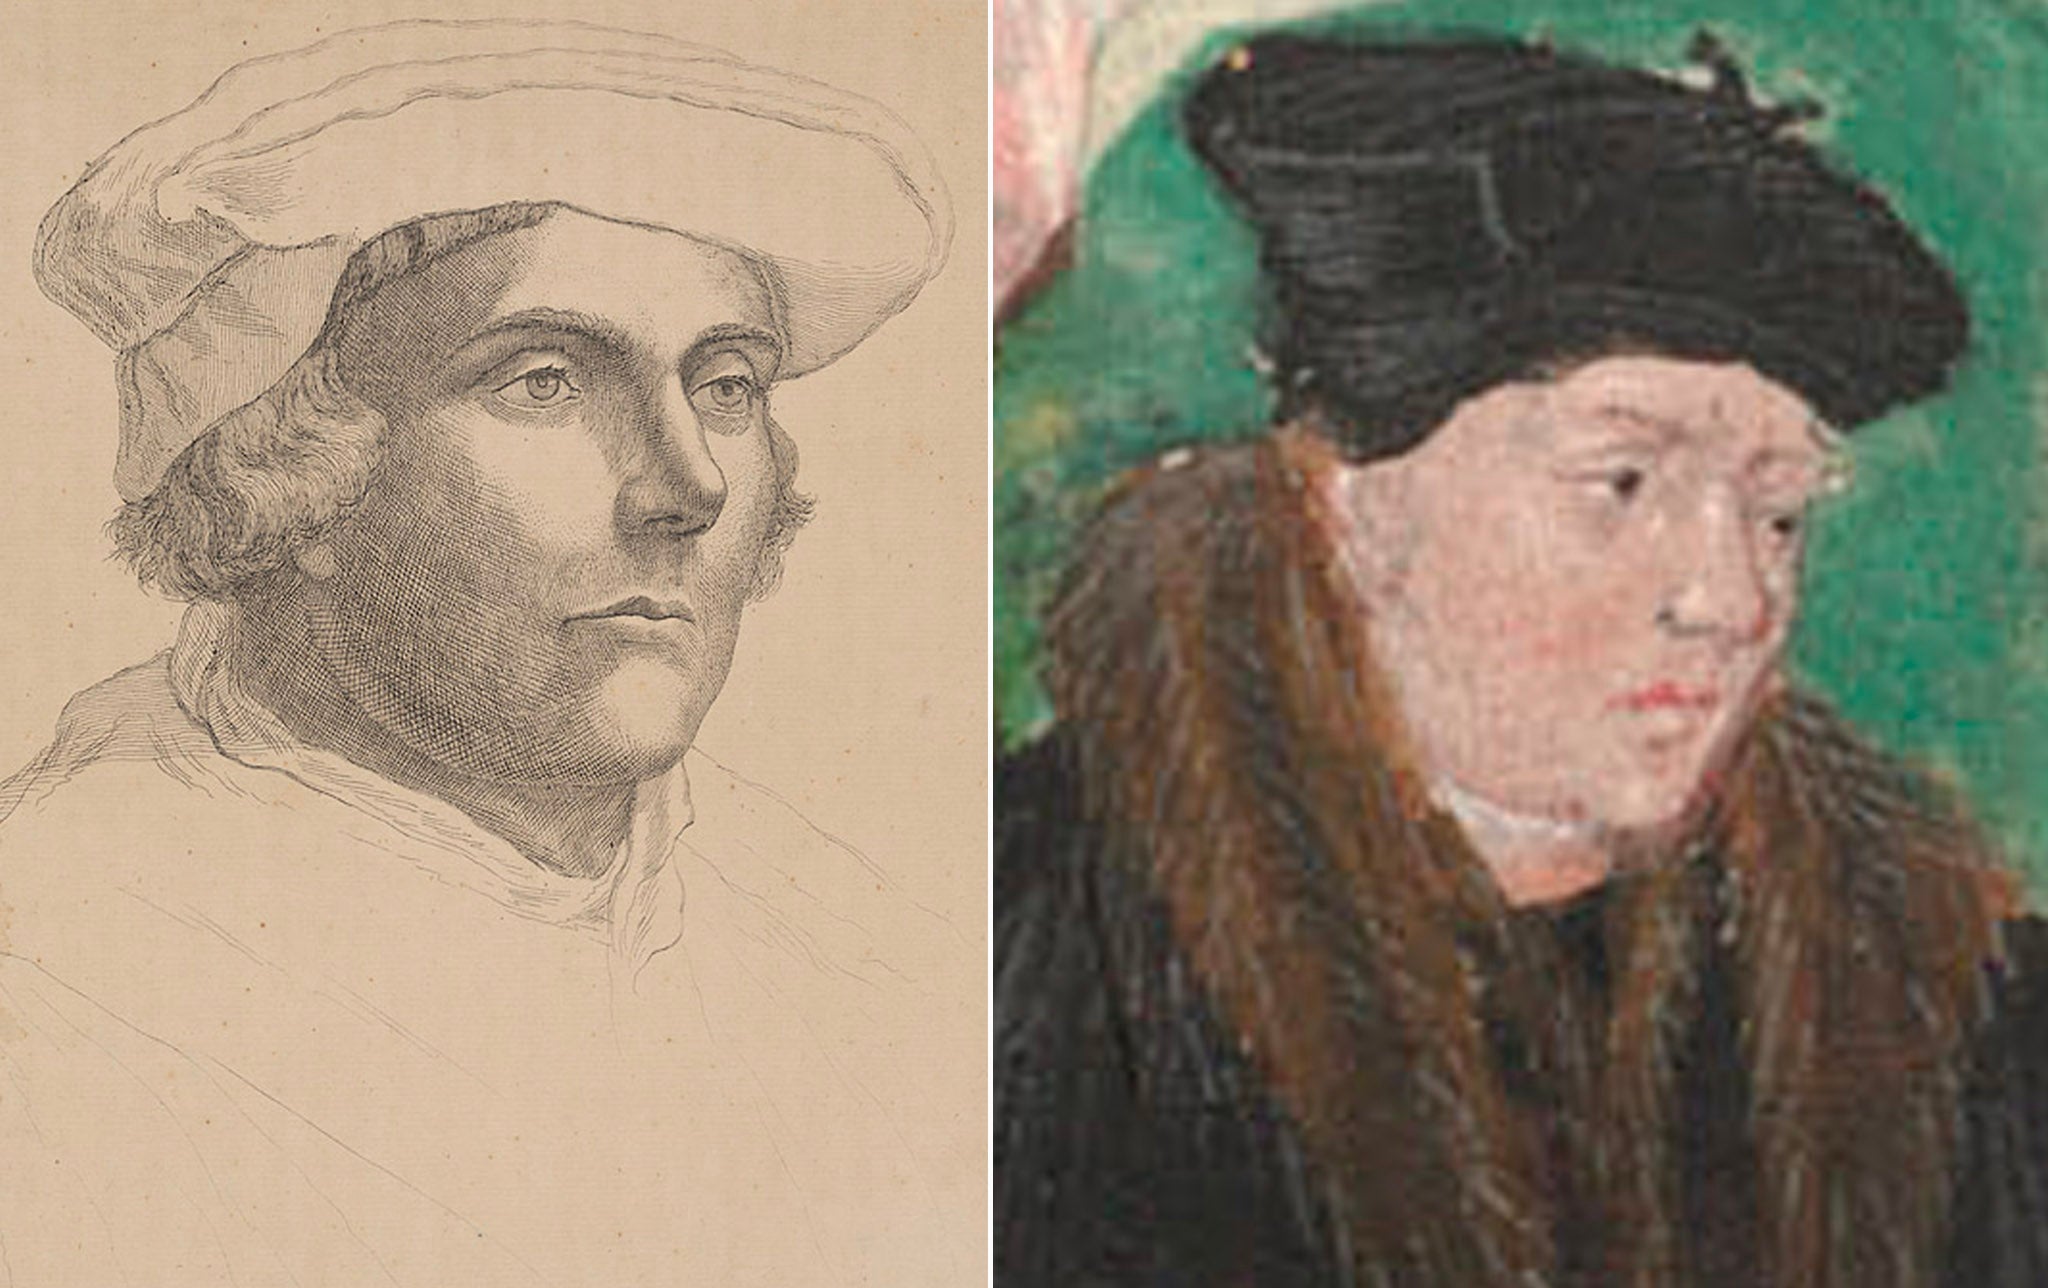 Hans Holbein’s portrait of Richard Rich compared to a pasted in face in The Great Bible